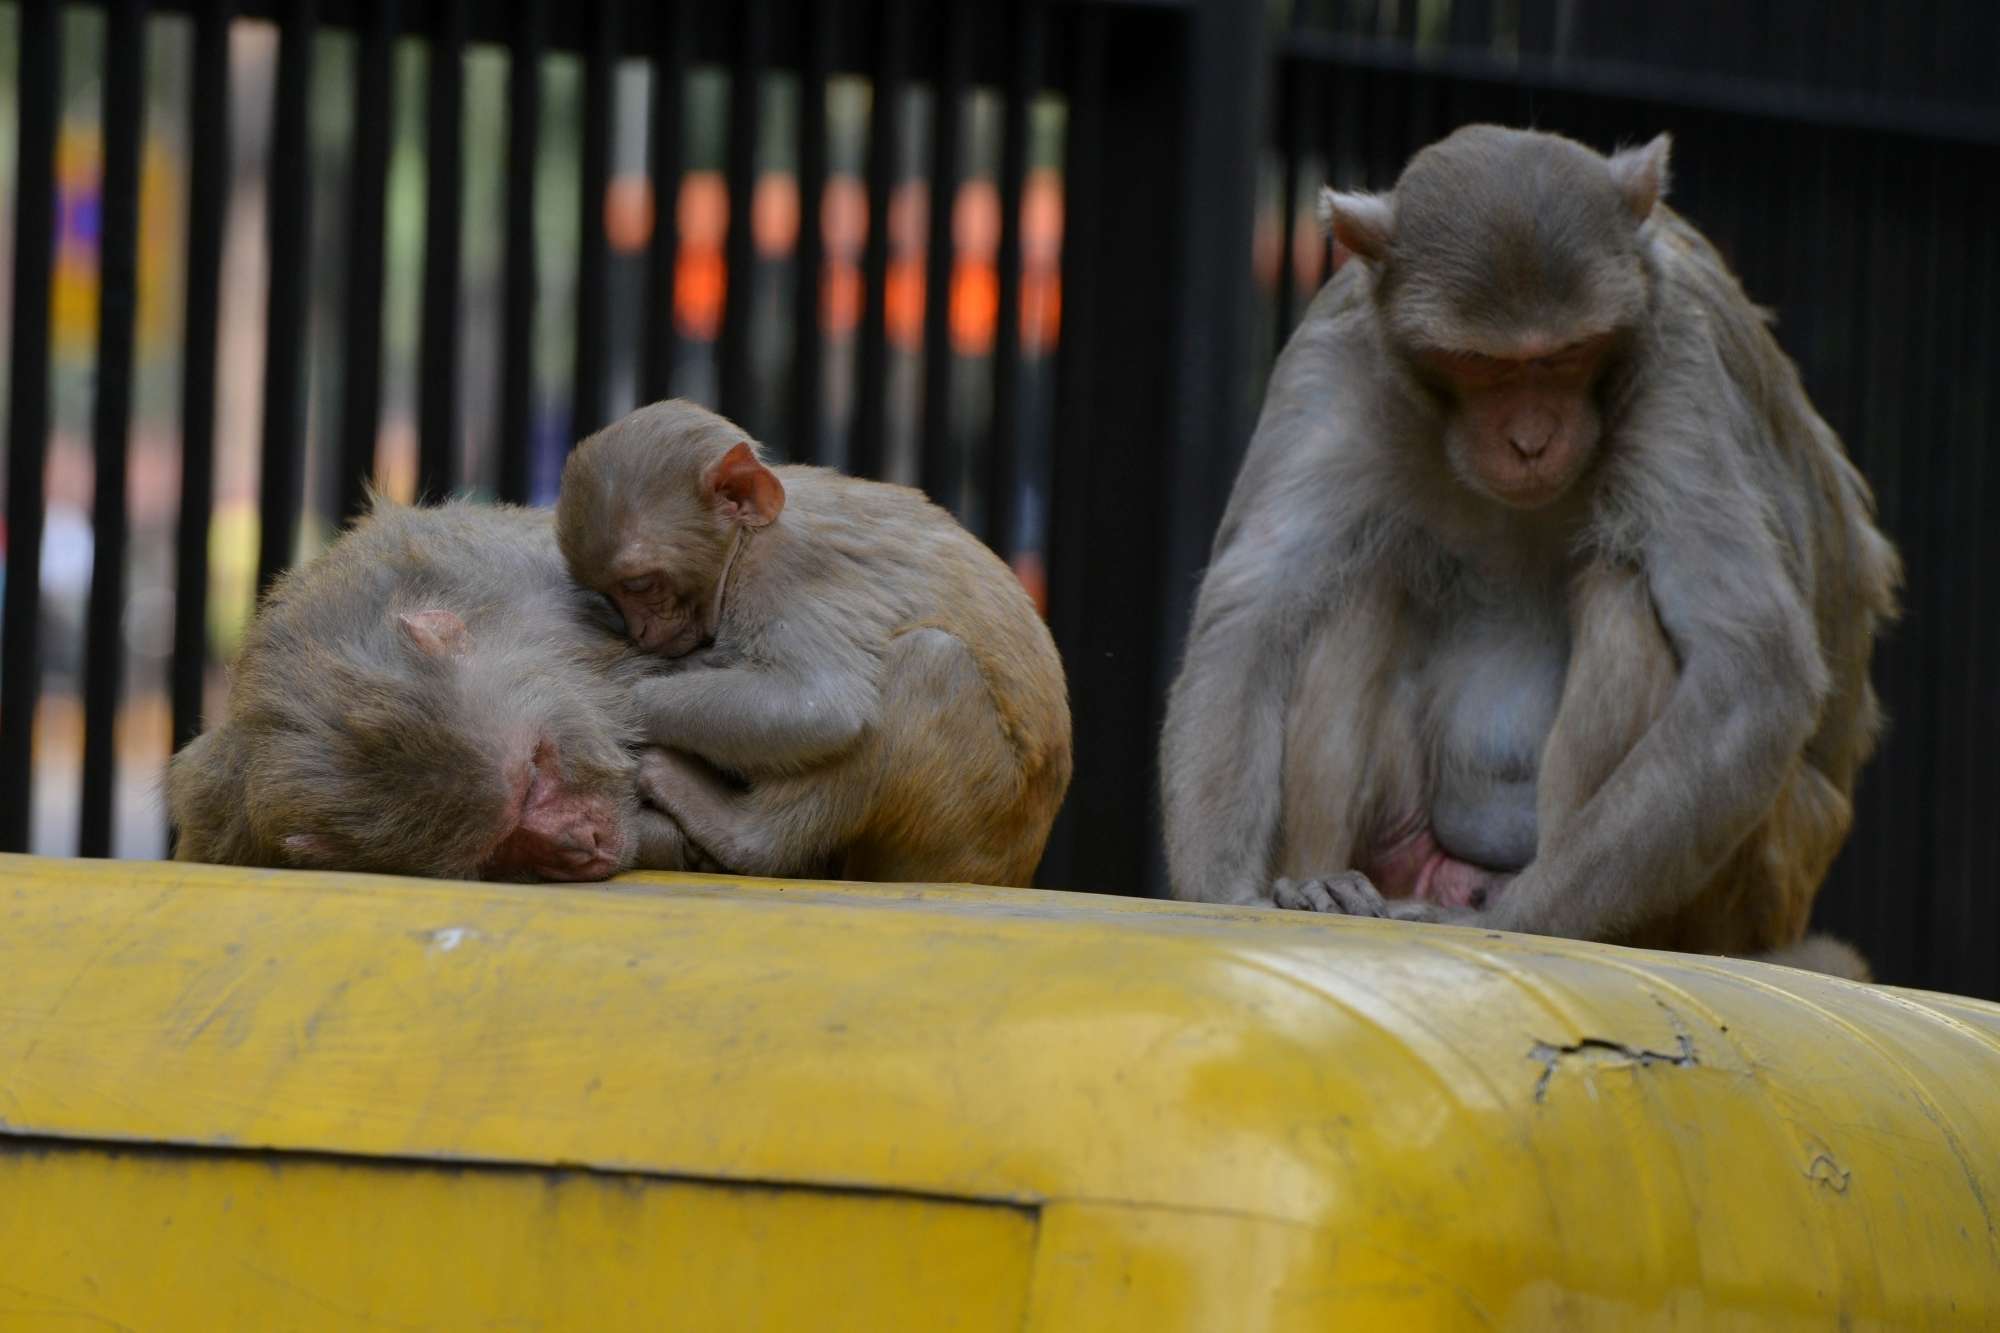 A Six Year Old Alcoholic Monkey In India Will Serve Life Sentence Business Insider India